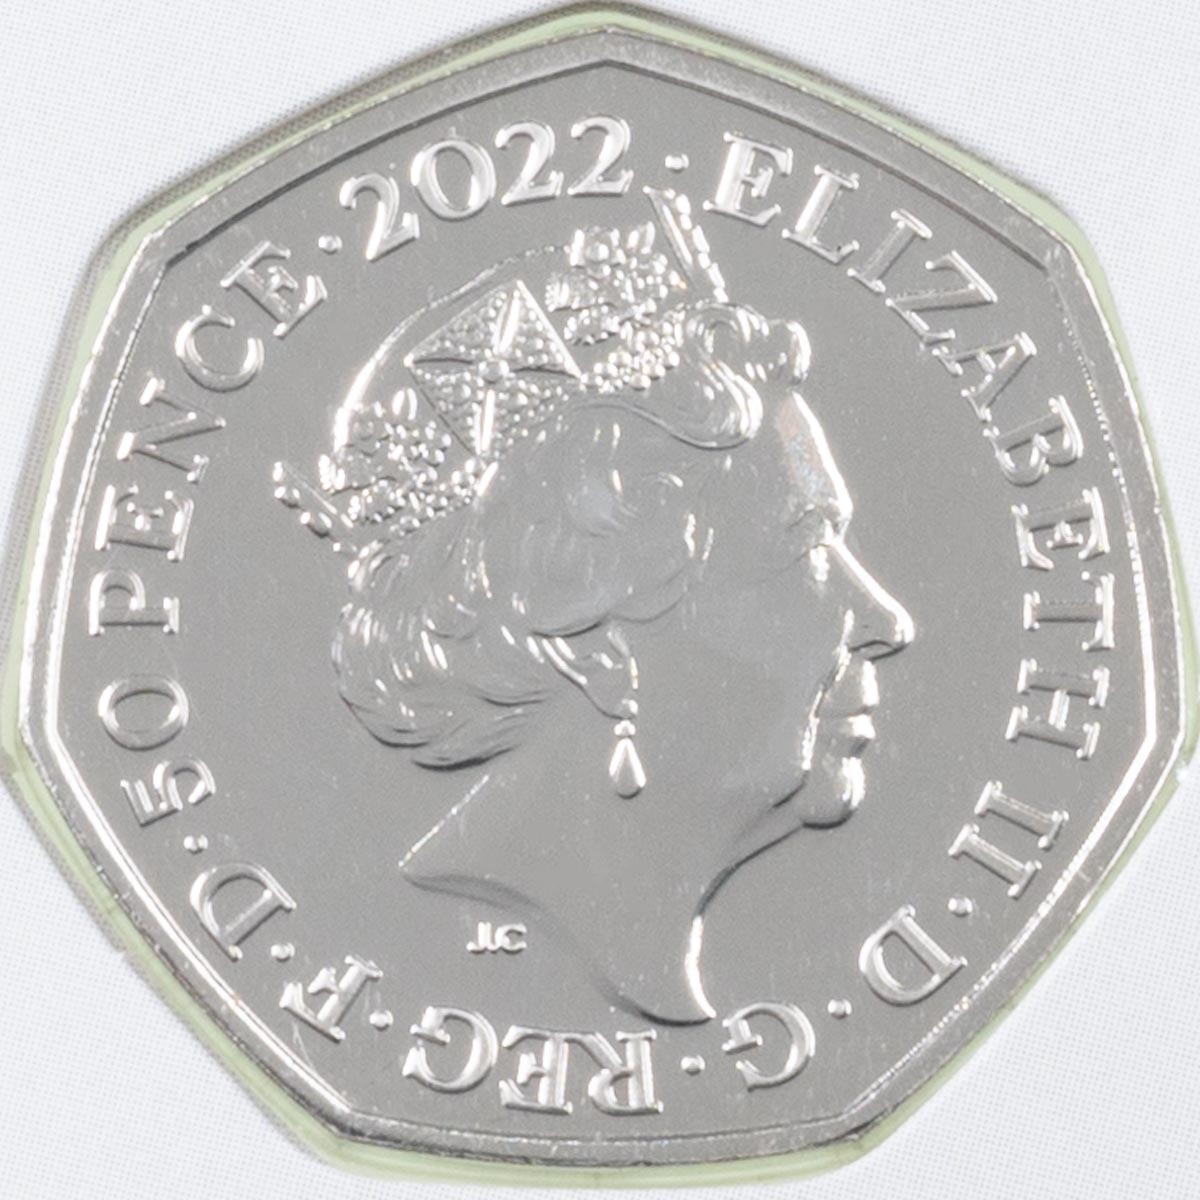 uk22cebc-2022-birmingham-commonwealth-games-team-england-edition-coloured-brilliant-uncirculated-fifty-pence-coin-002-m